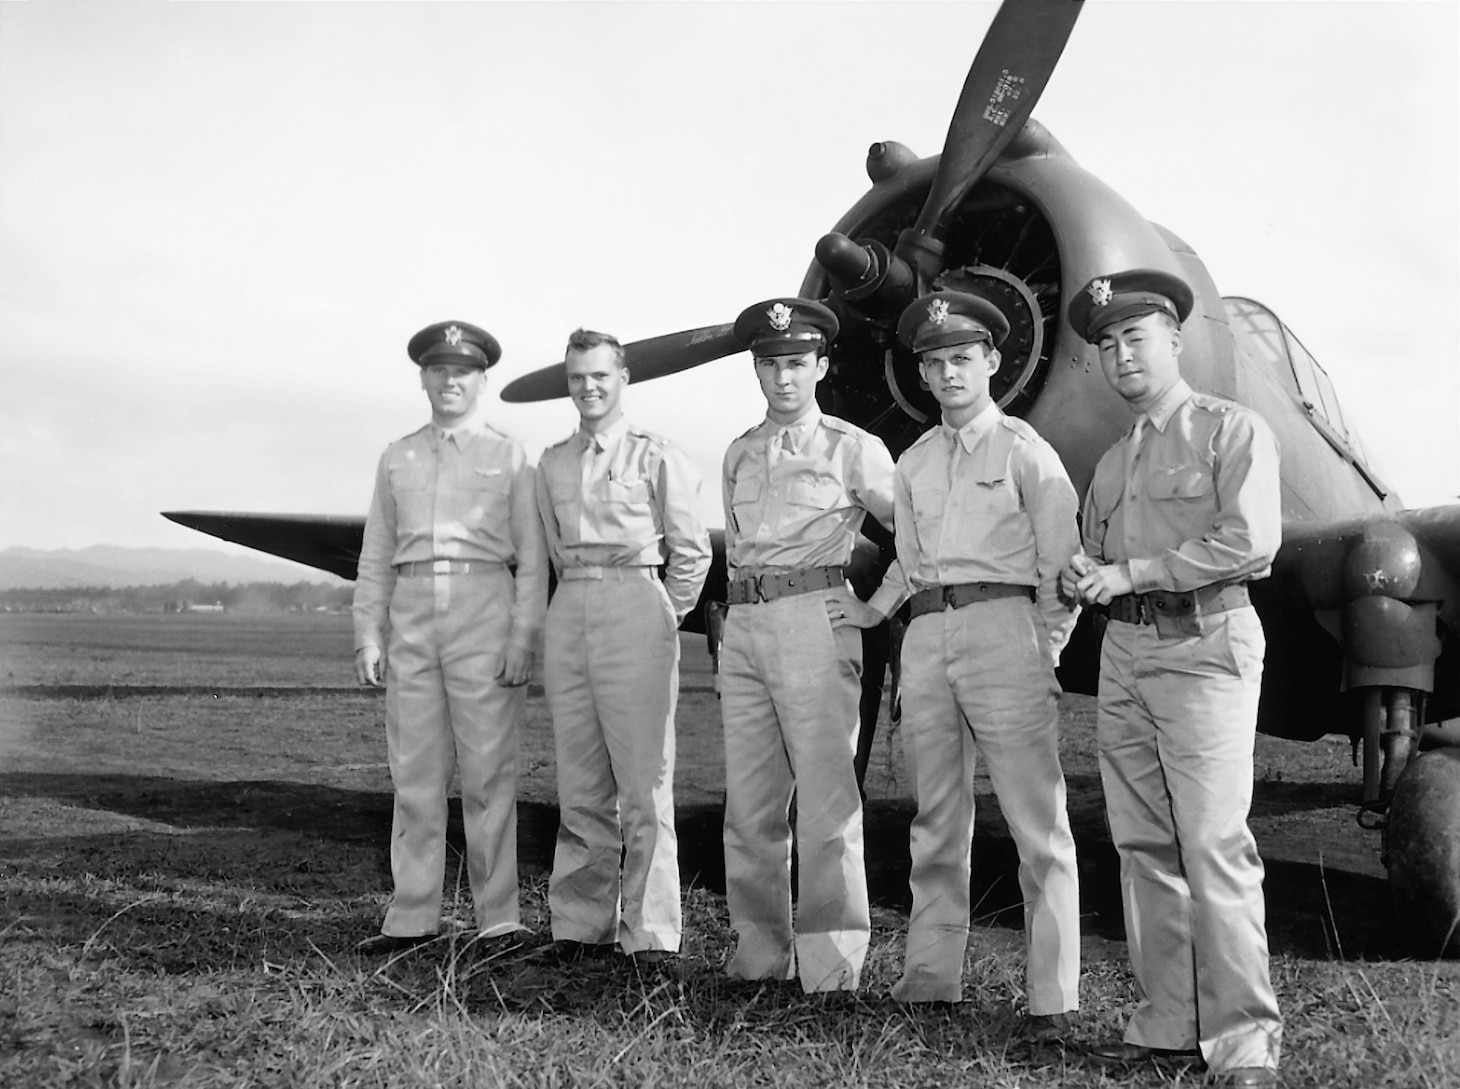 A post-raid lineup of some of the Army aviators who chased the departing Japanese raiders and shot a few down. They pose in front of the P-36A that 2nd Lt. Harry W. Brown flew. From left to right: P-36 pilots 1st Lt. Lewis M. Sanders and 2nd Lt. Philip M. Rasmussen, each pilot got one Zero, P-40B pilots 2nd Lts. Ken Taylor and George Welch, together, scored six confirmed kills (Welch with four and Taylor with two, although post-war research added two more to Taylor’s total on Dec. 7).